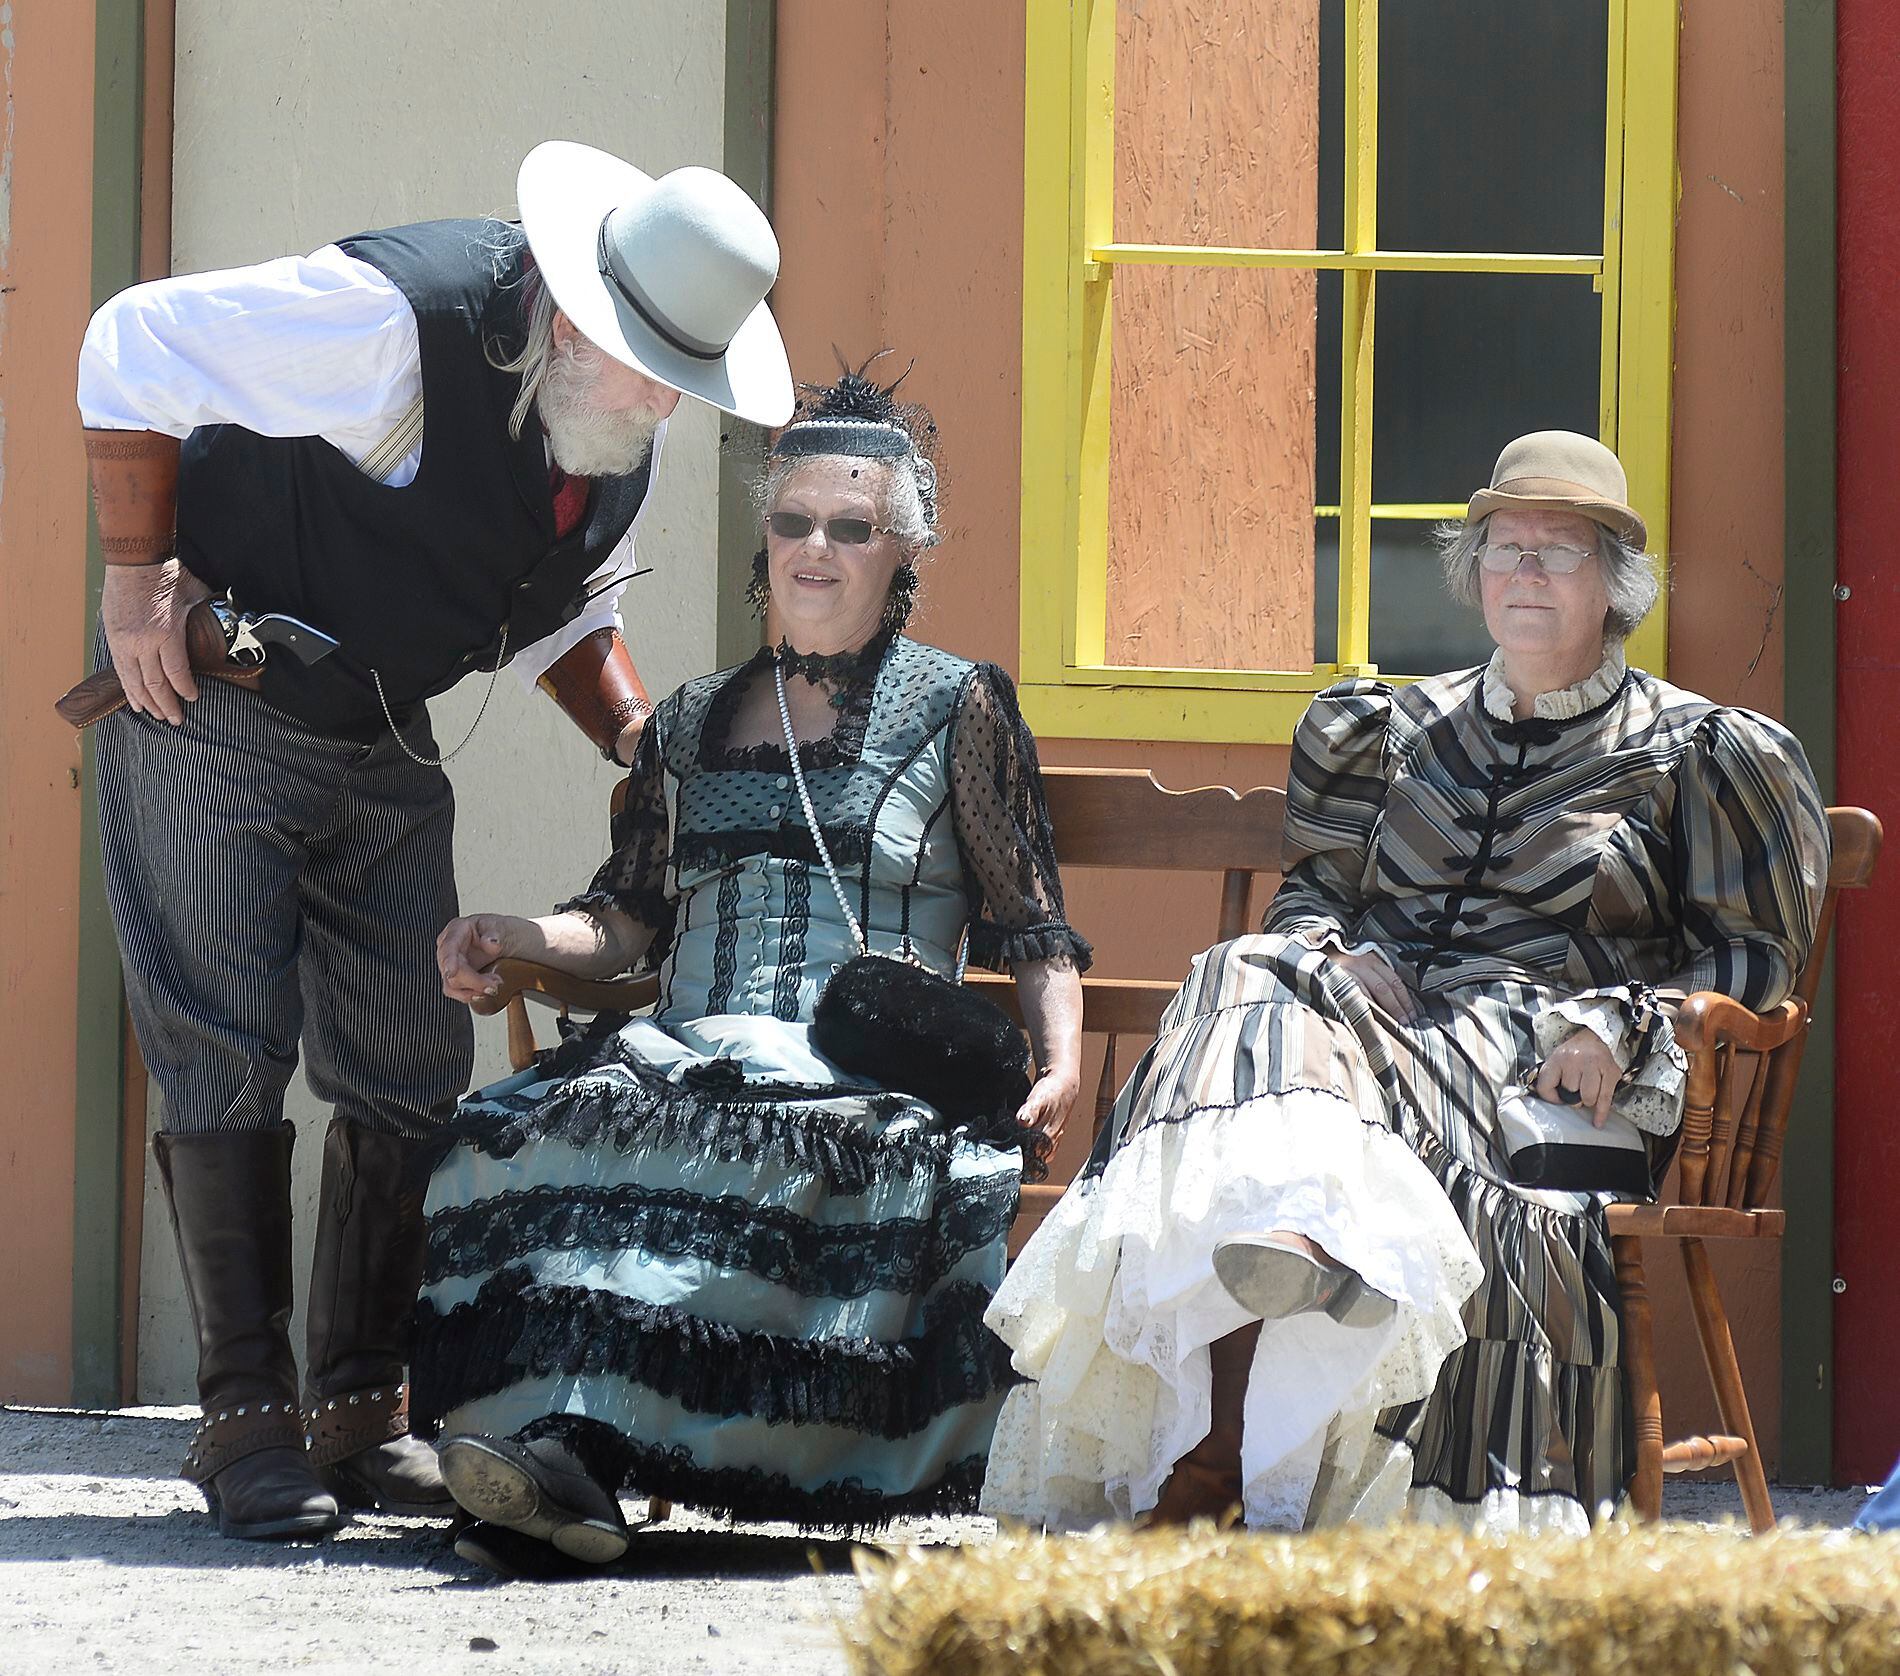 Actors in the Old West Regulators perform a scene outside a saloon during a reenactment Saturday, May 27, 2023, at Wild Bill Days in Utica.